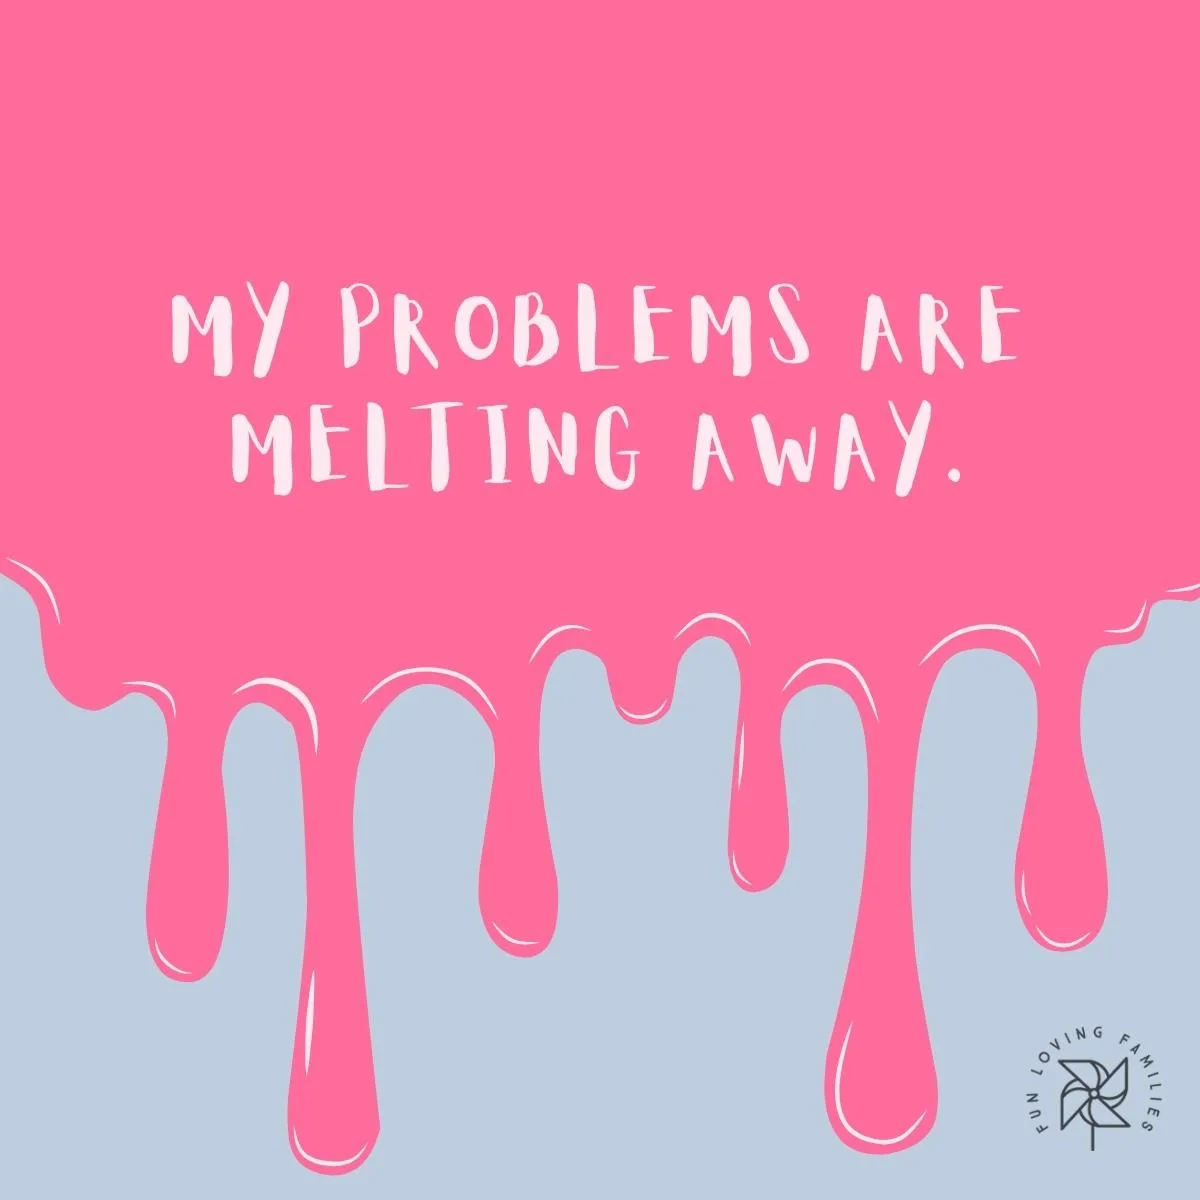 My problems are melting away affirmation